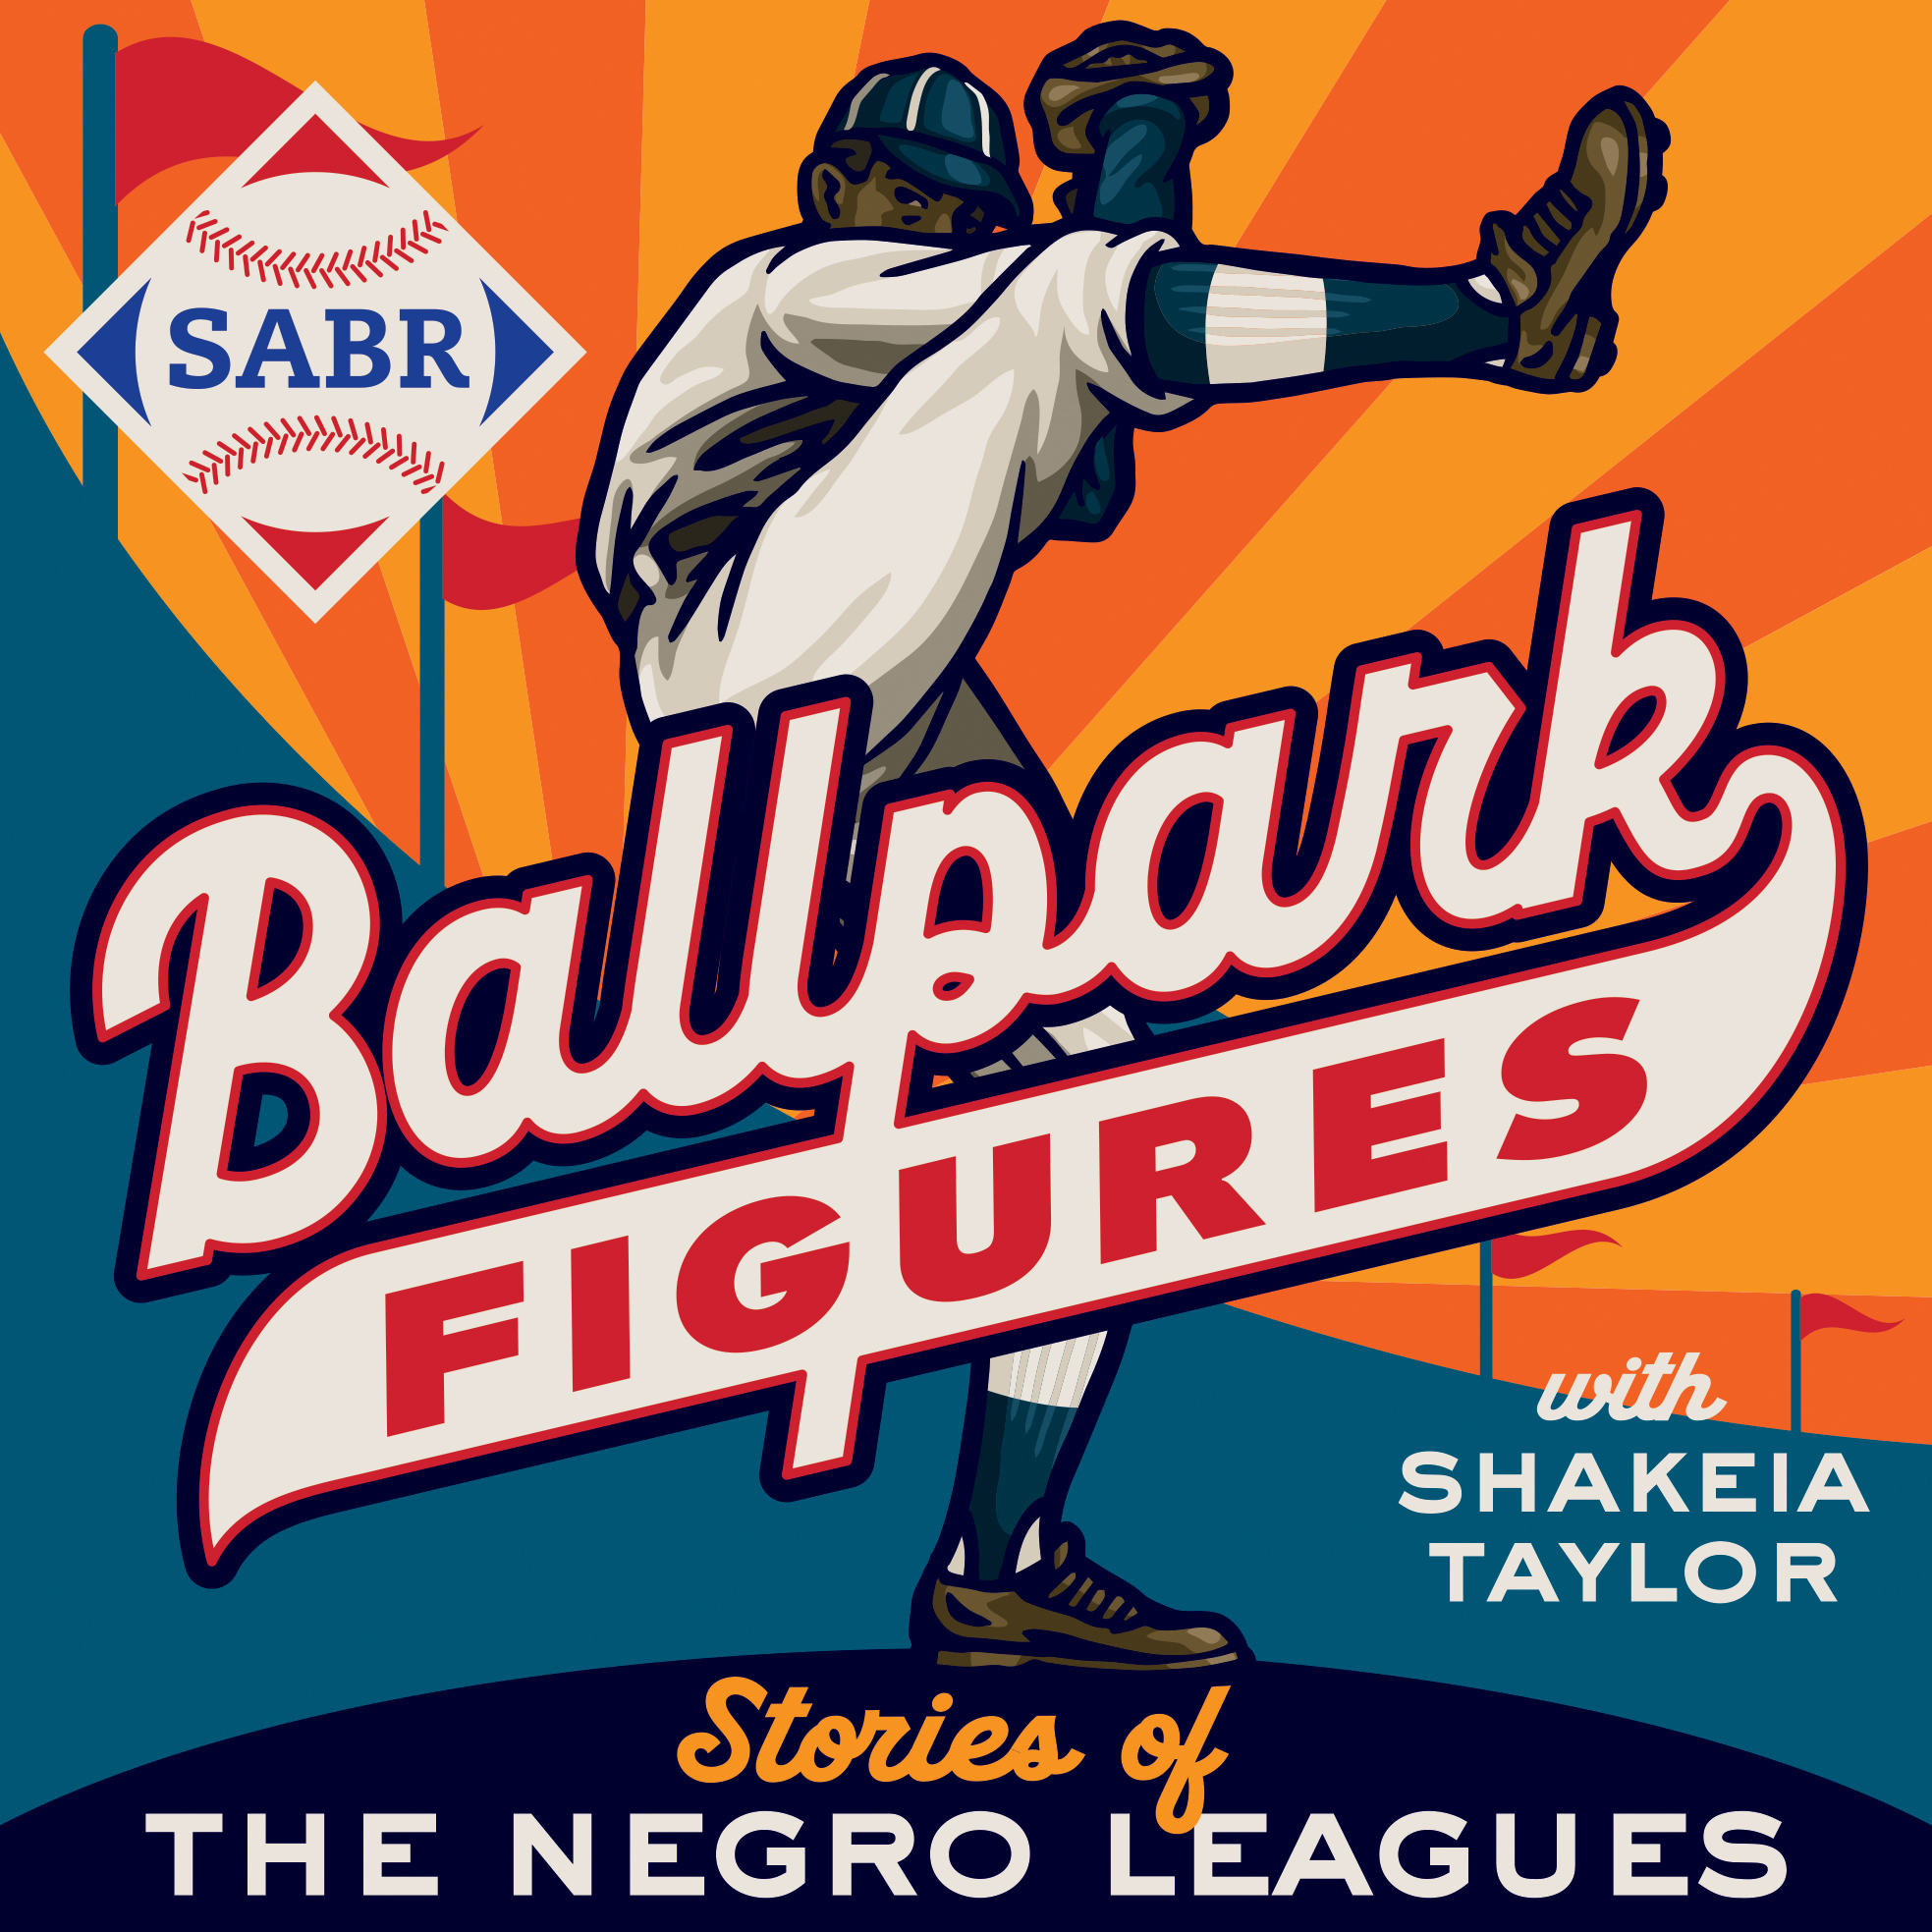 Ballpark Figures: Stories of the Negro Leagues, hosted by Shakeia Taylor (Artwork: Gary Cieradkowski Jr.)